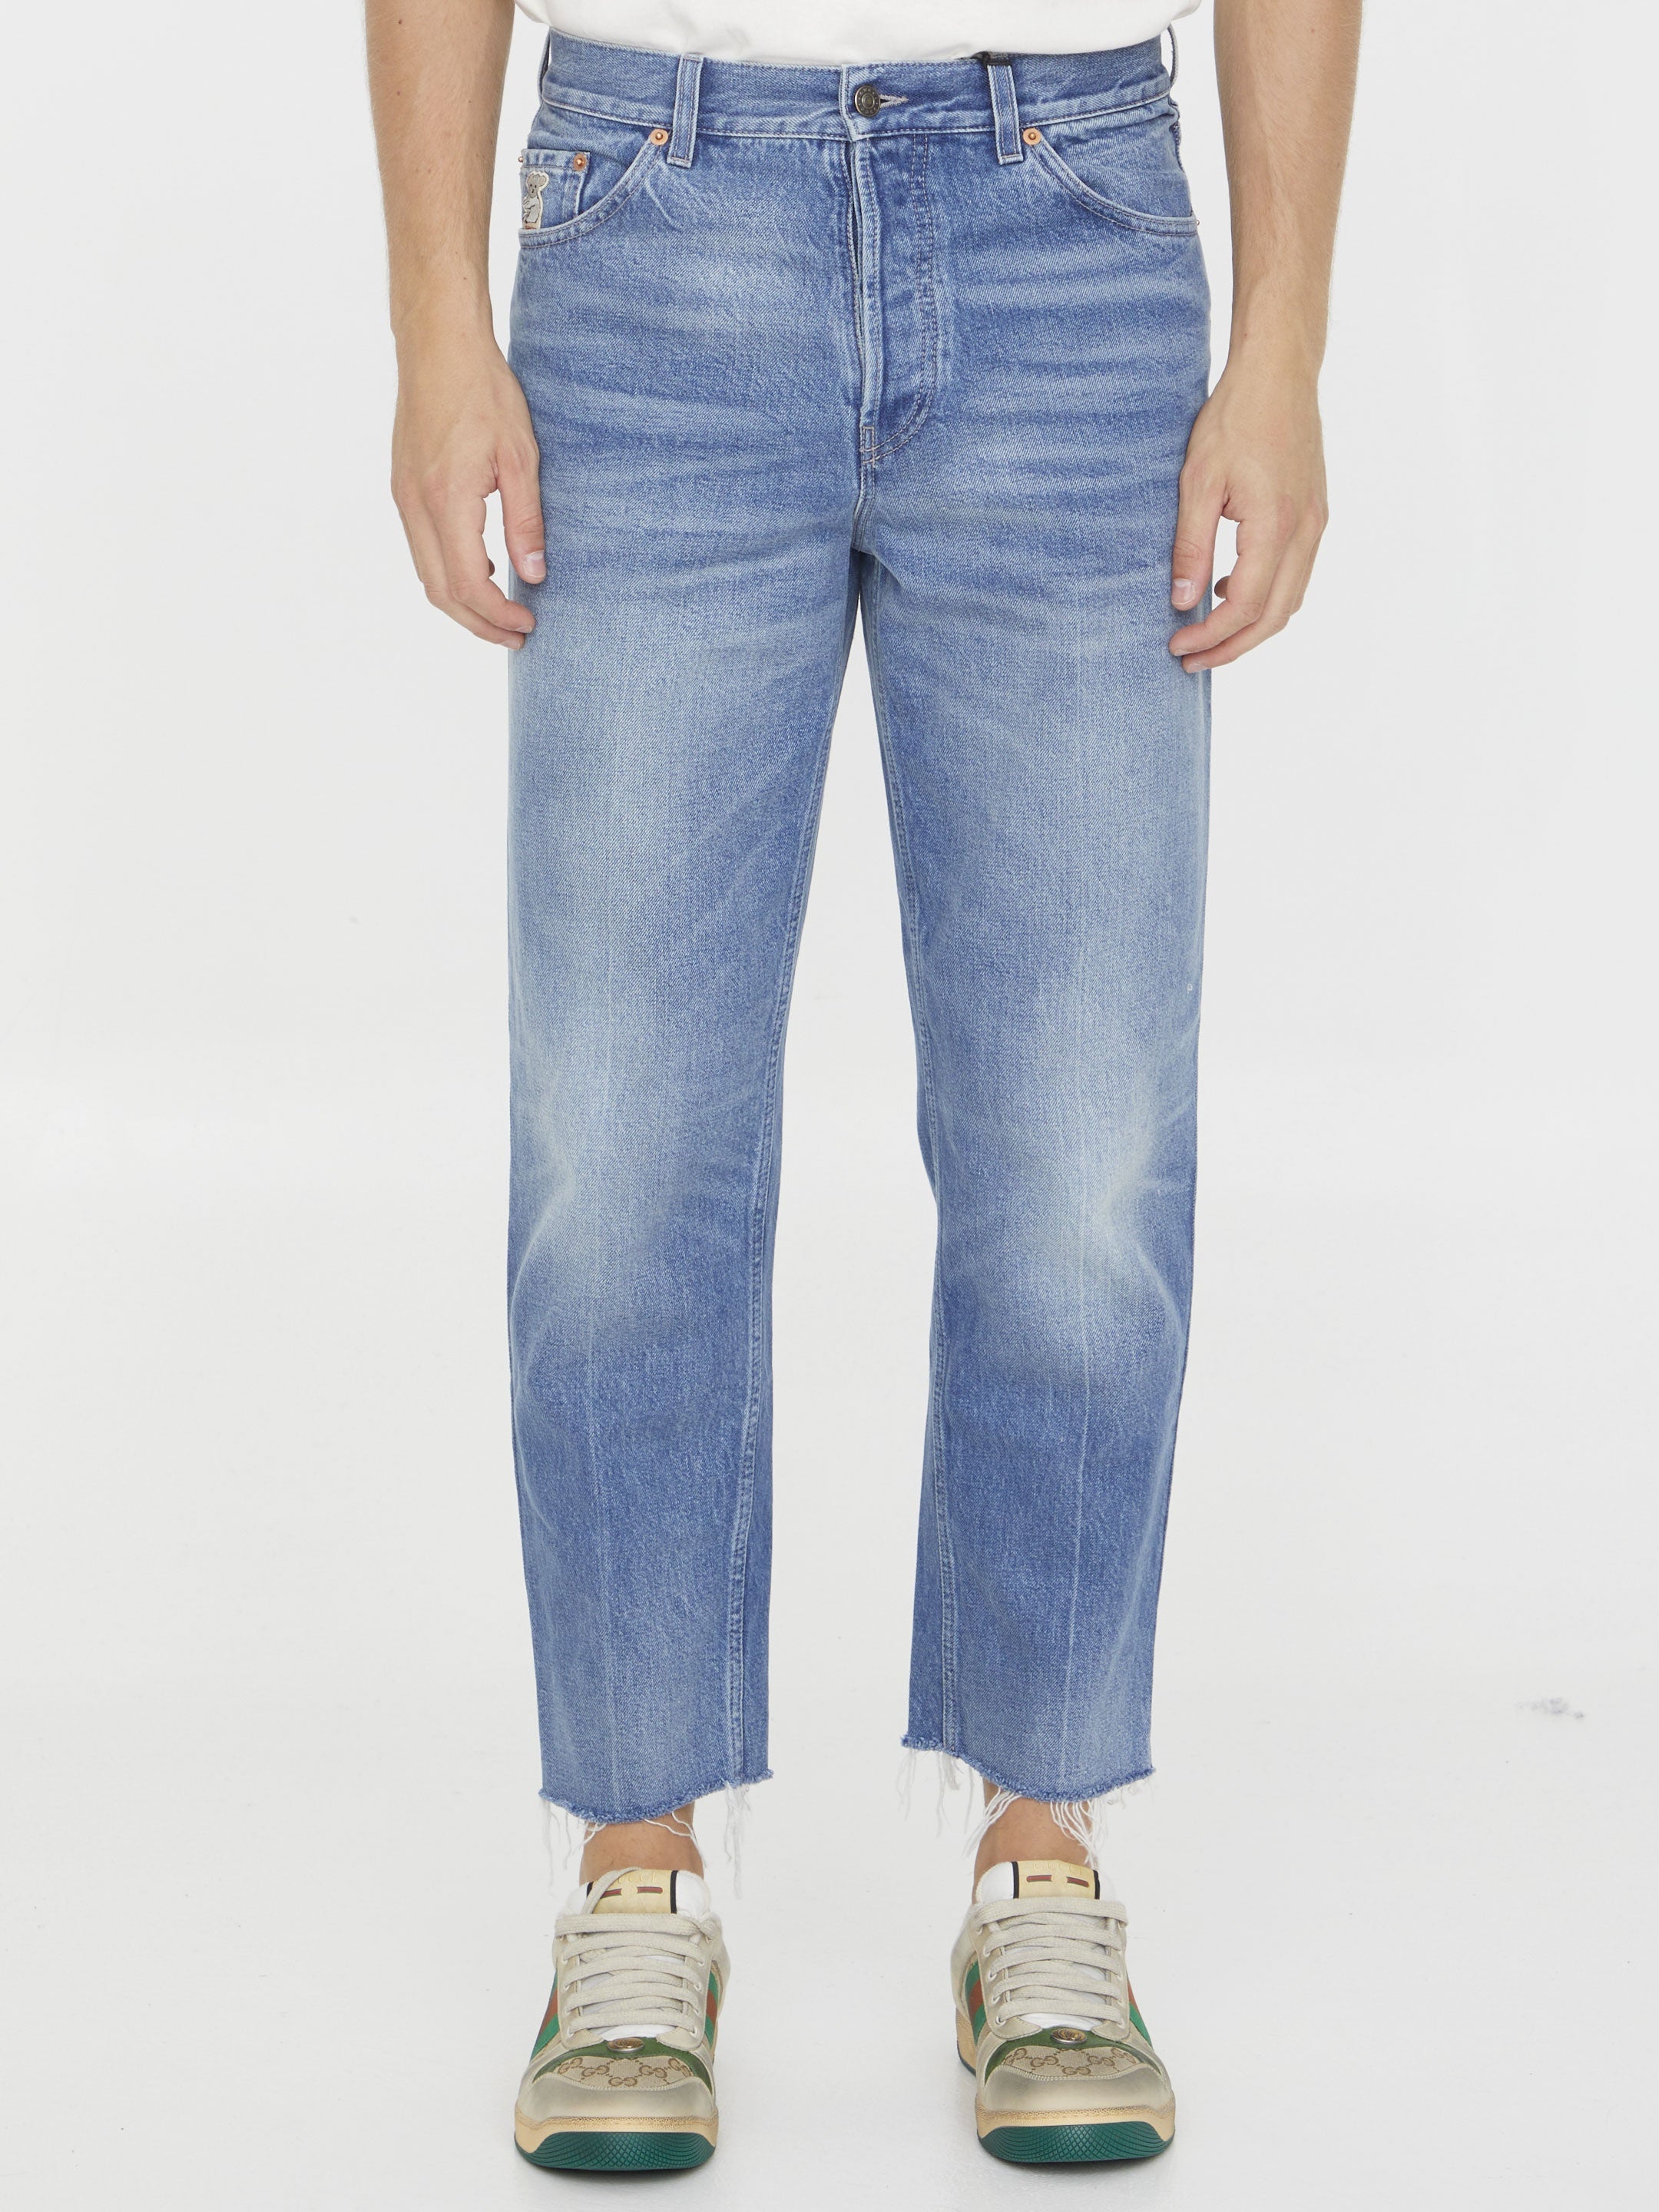 Washed-out denim jeans